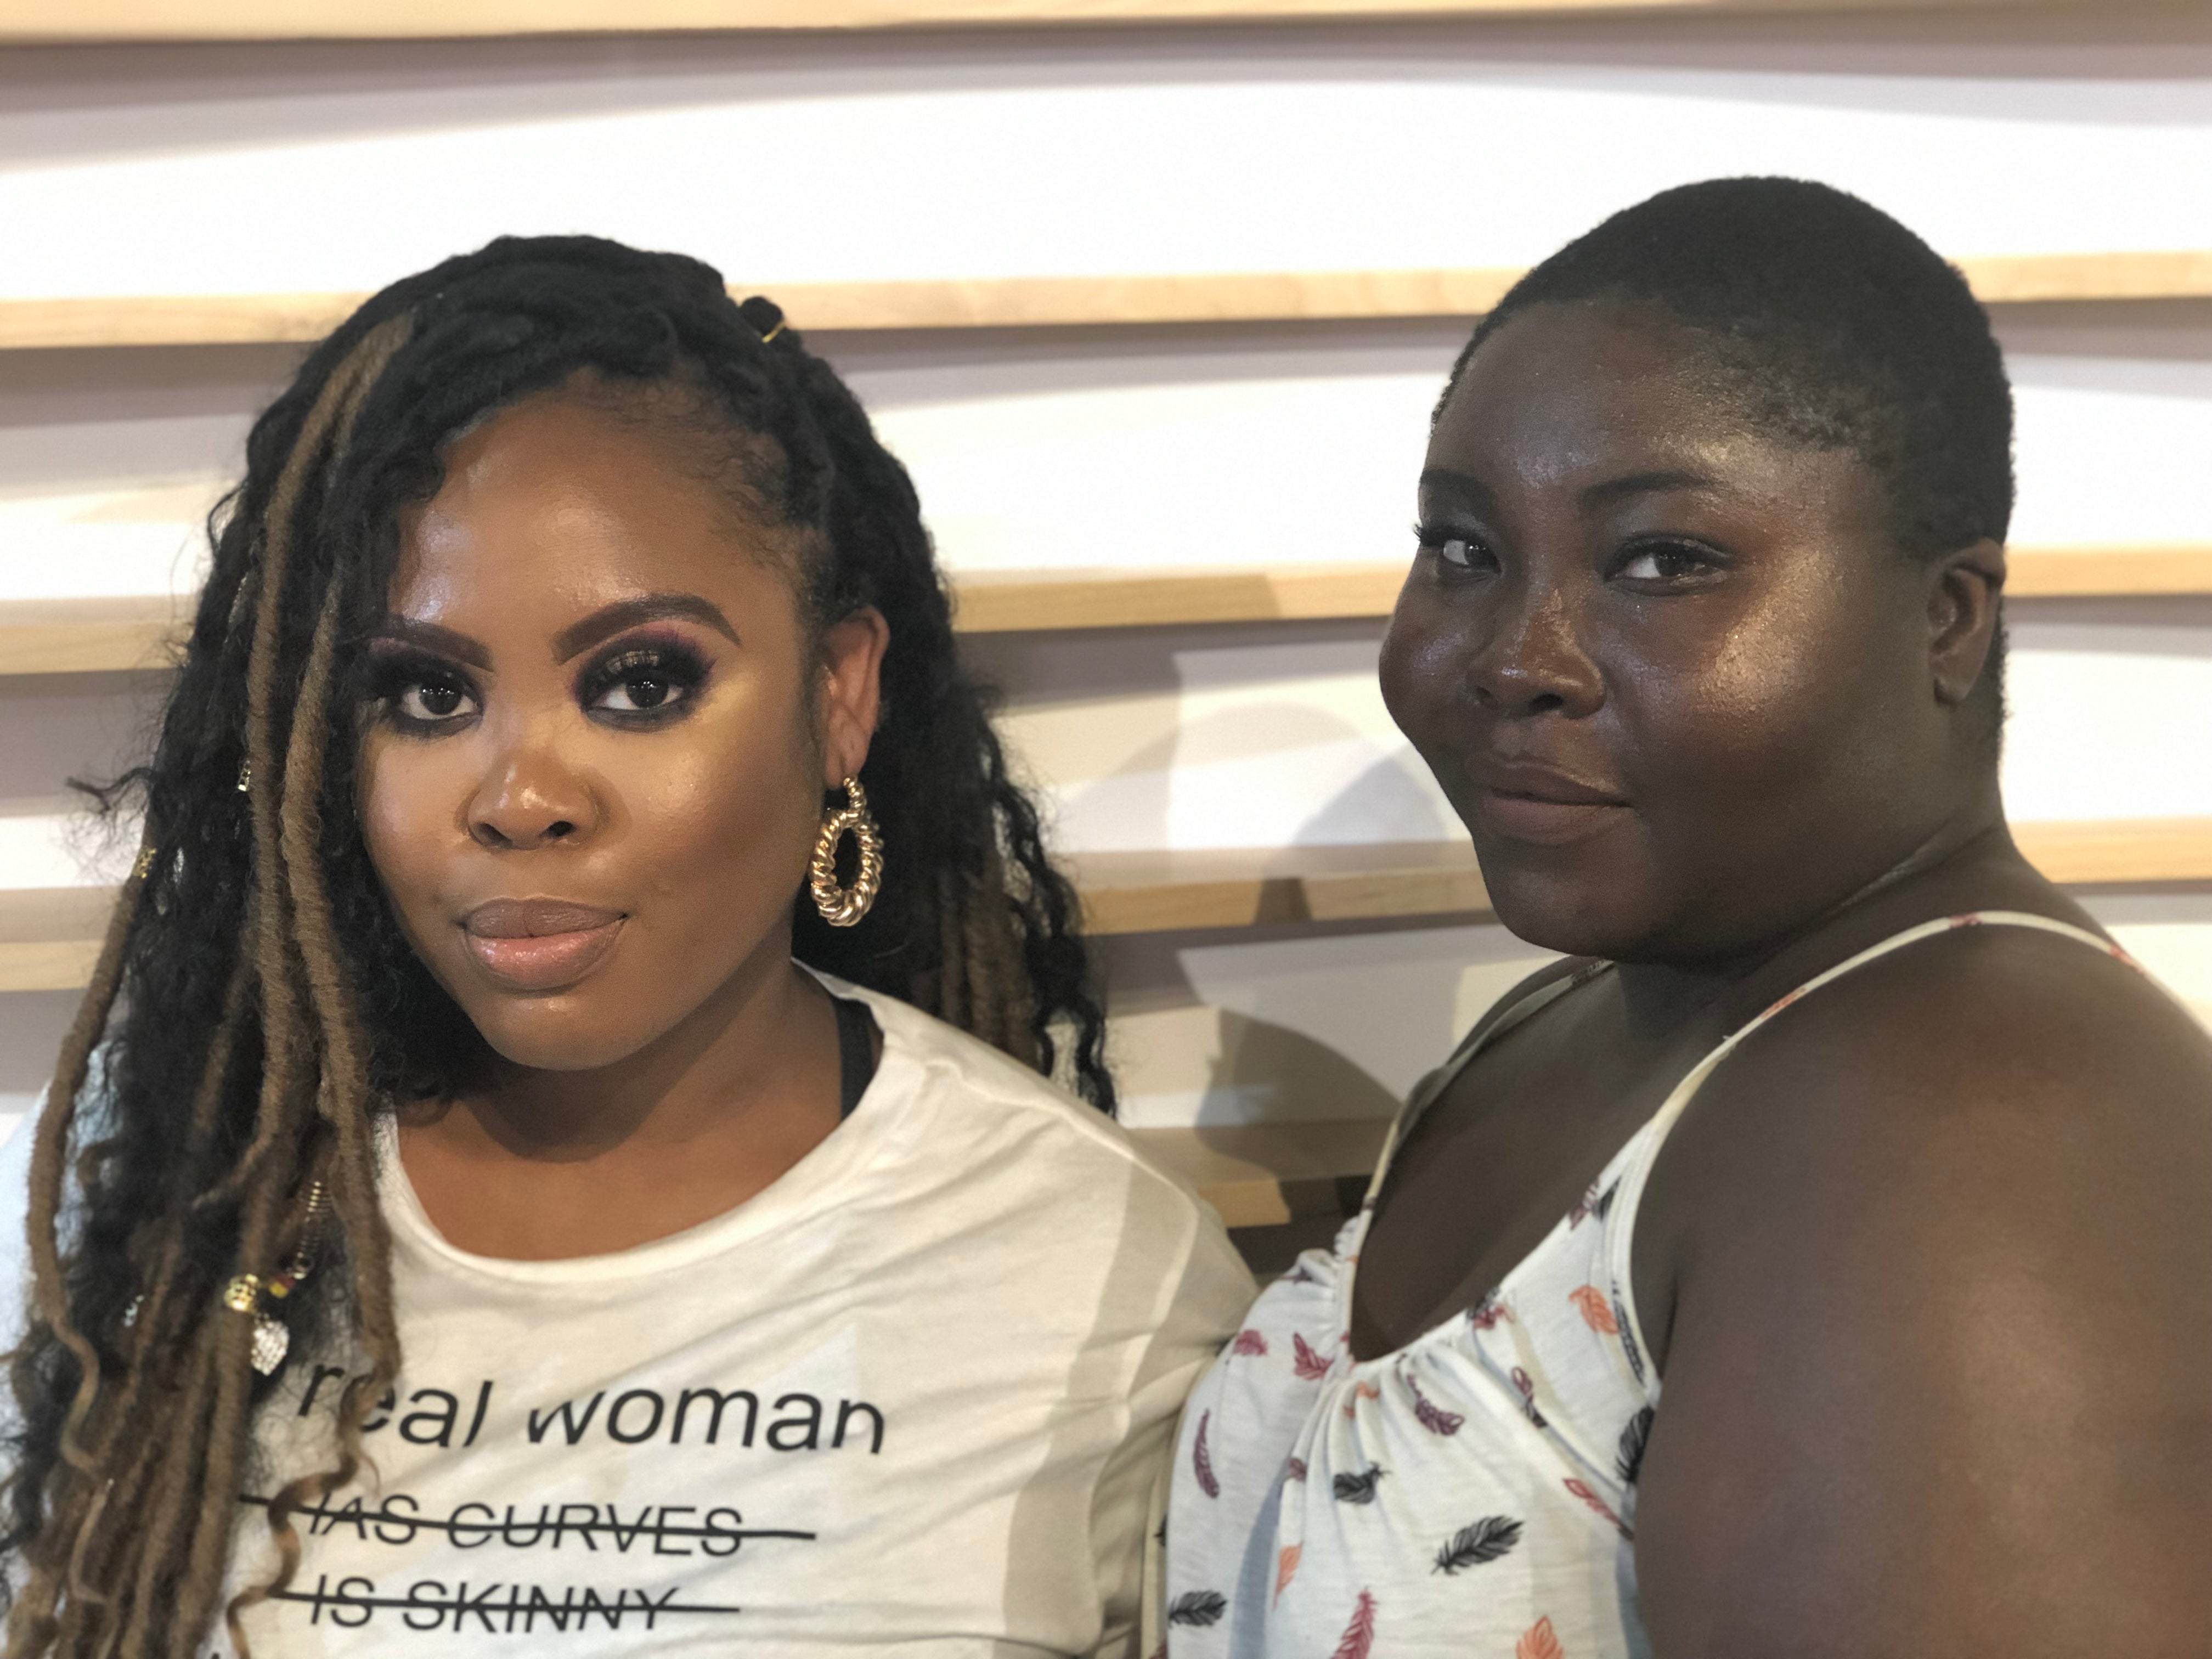 Beauty Moments From SEPHORiA House Of Beauty